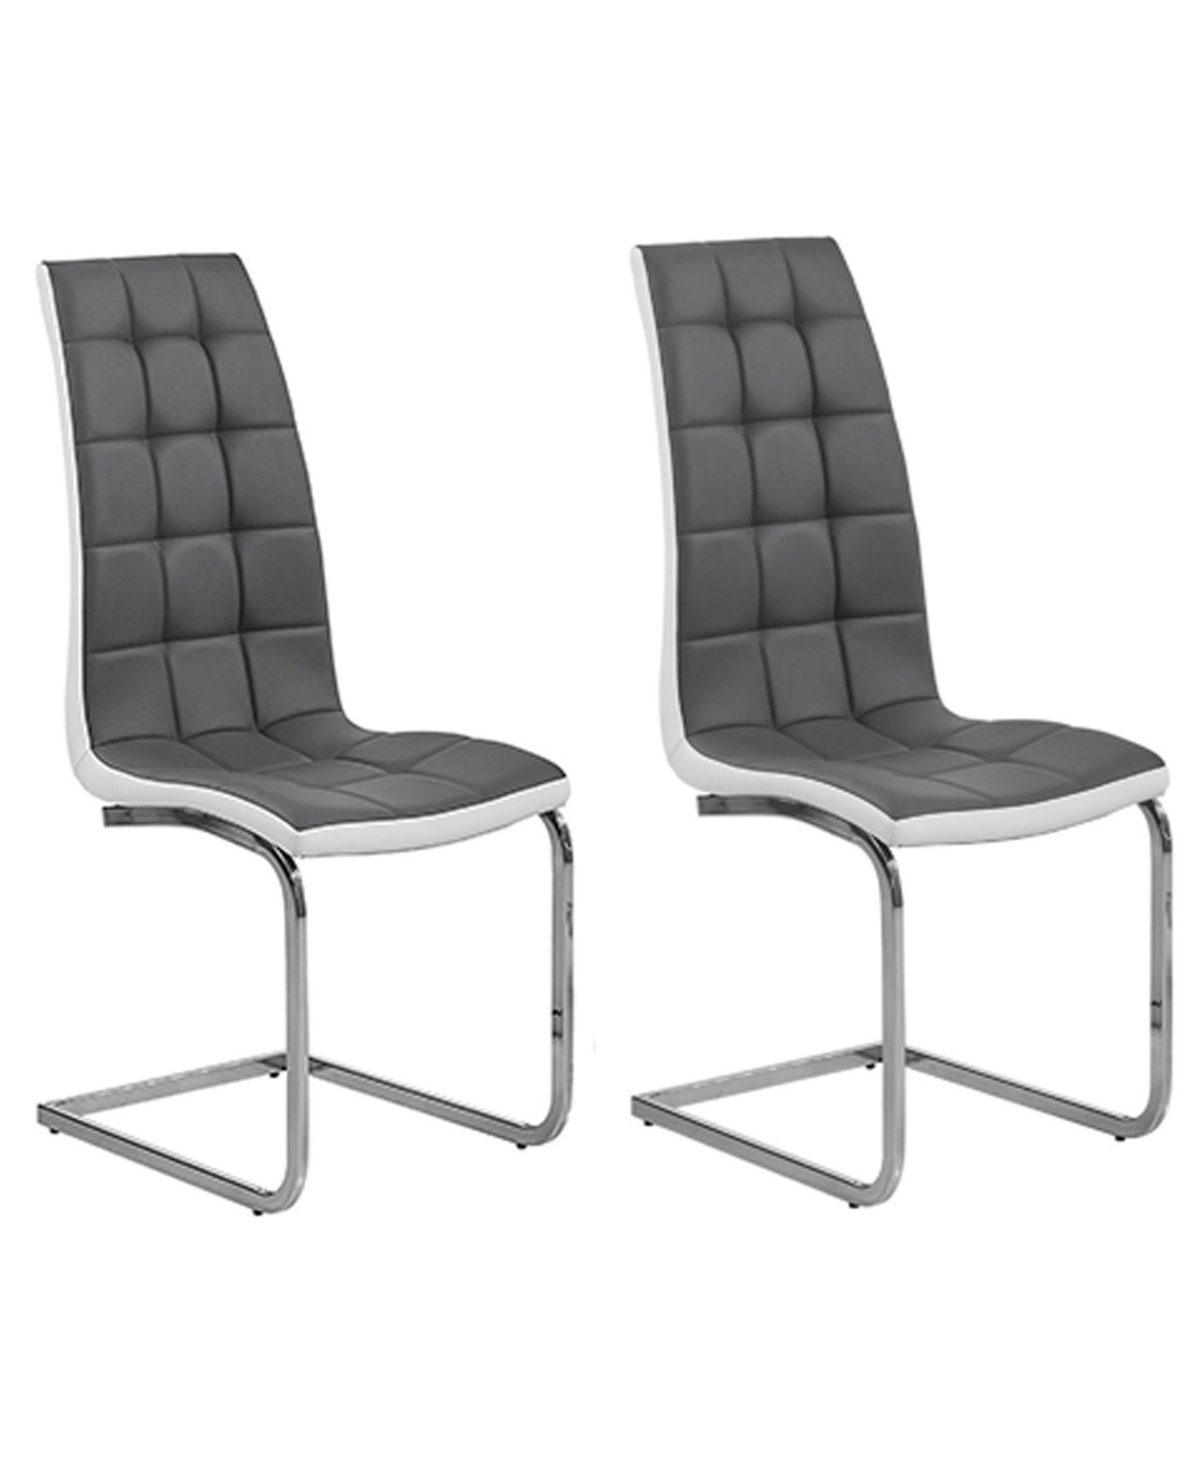 12857505 Marilyn Faux Leather Dining Side Chairs,, Set of 2 sku 12857505